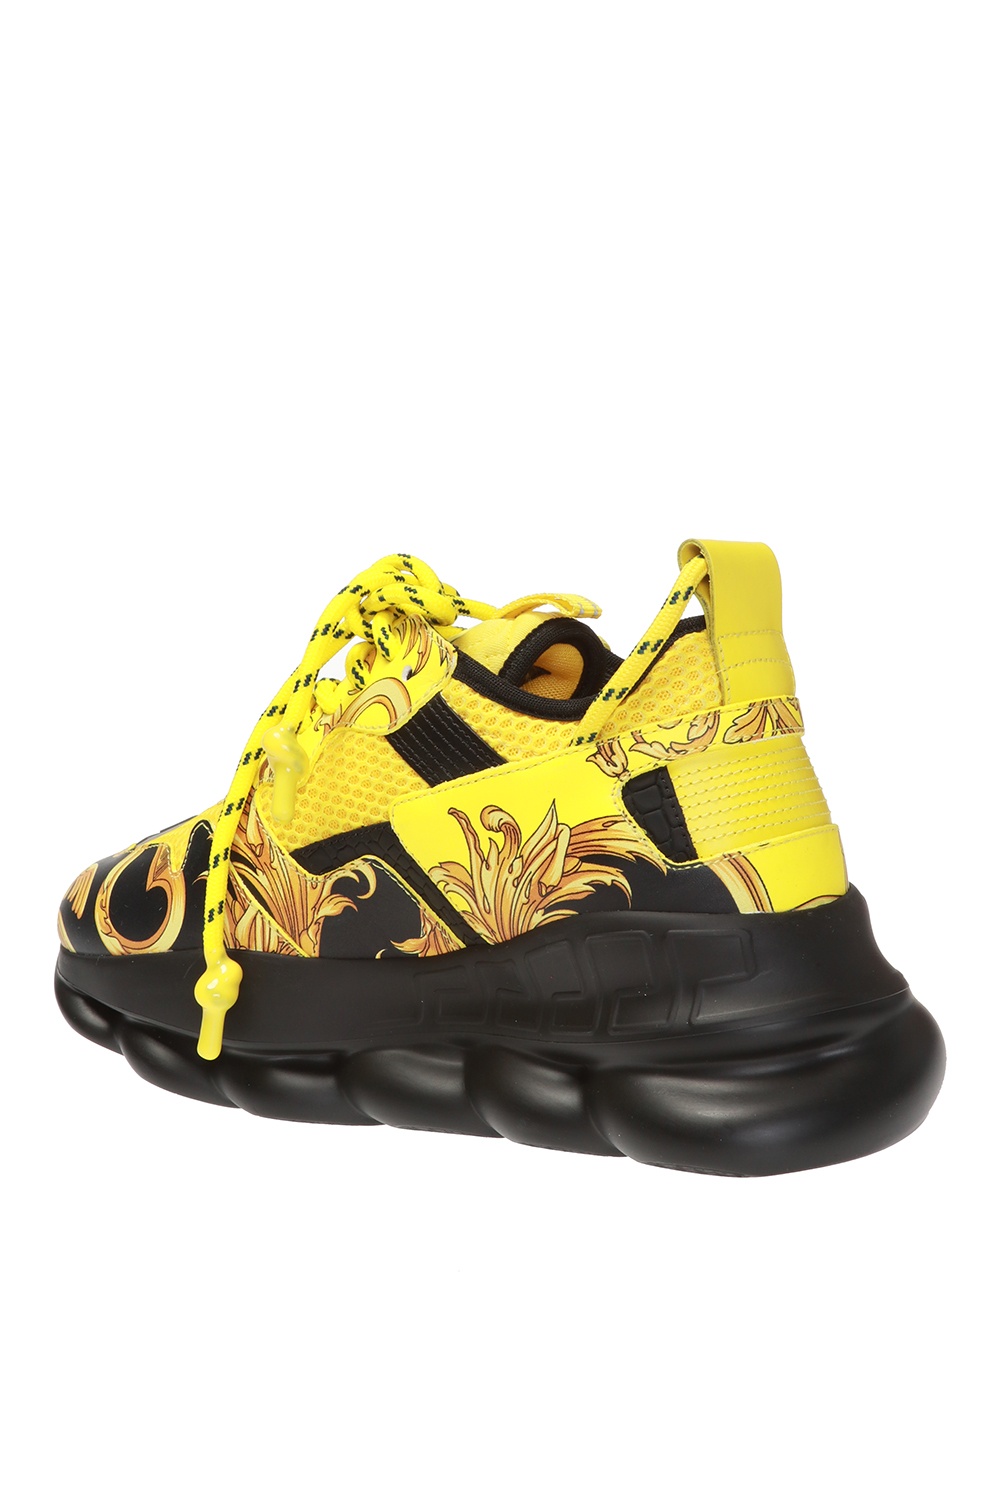 VERSACE Chain Reaction Yellow Red White Blue Sneakers Shoes Size 39 Or 8 US  Men